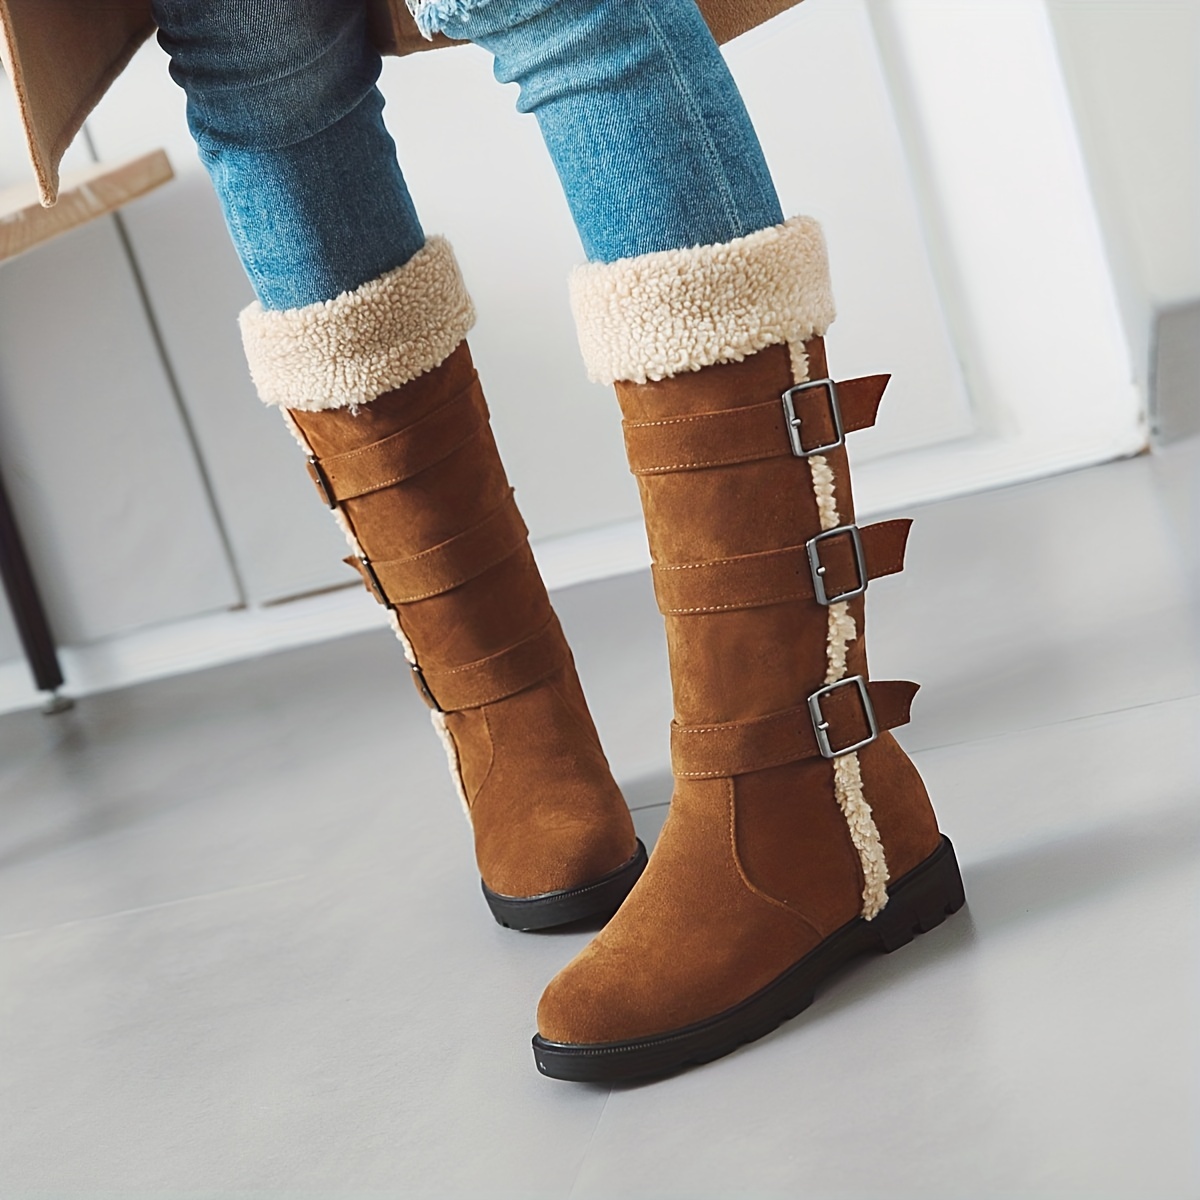 

Women's Fleece Lined Snow Boots, Thermal Buckle Strap Round Toe Knight Boots, Winter Warm Flat Mid Calf Boots